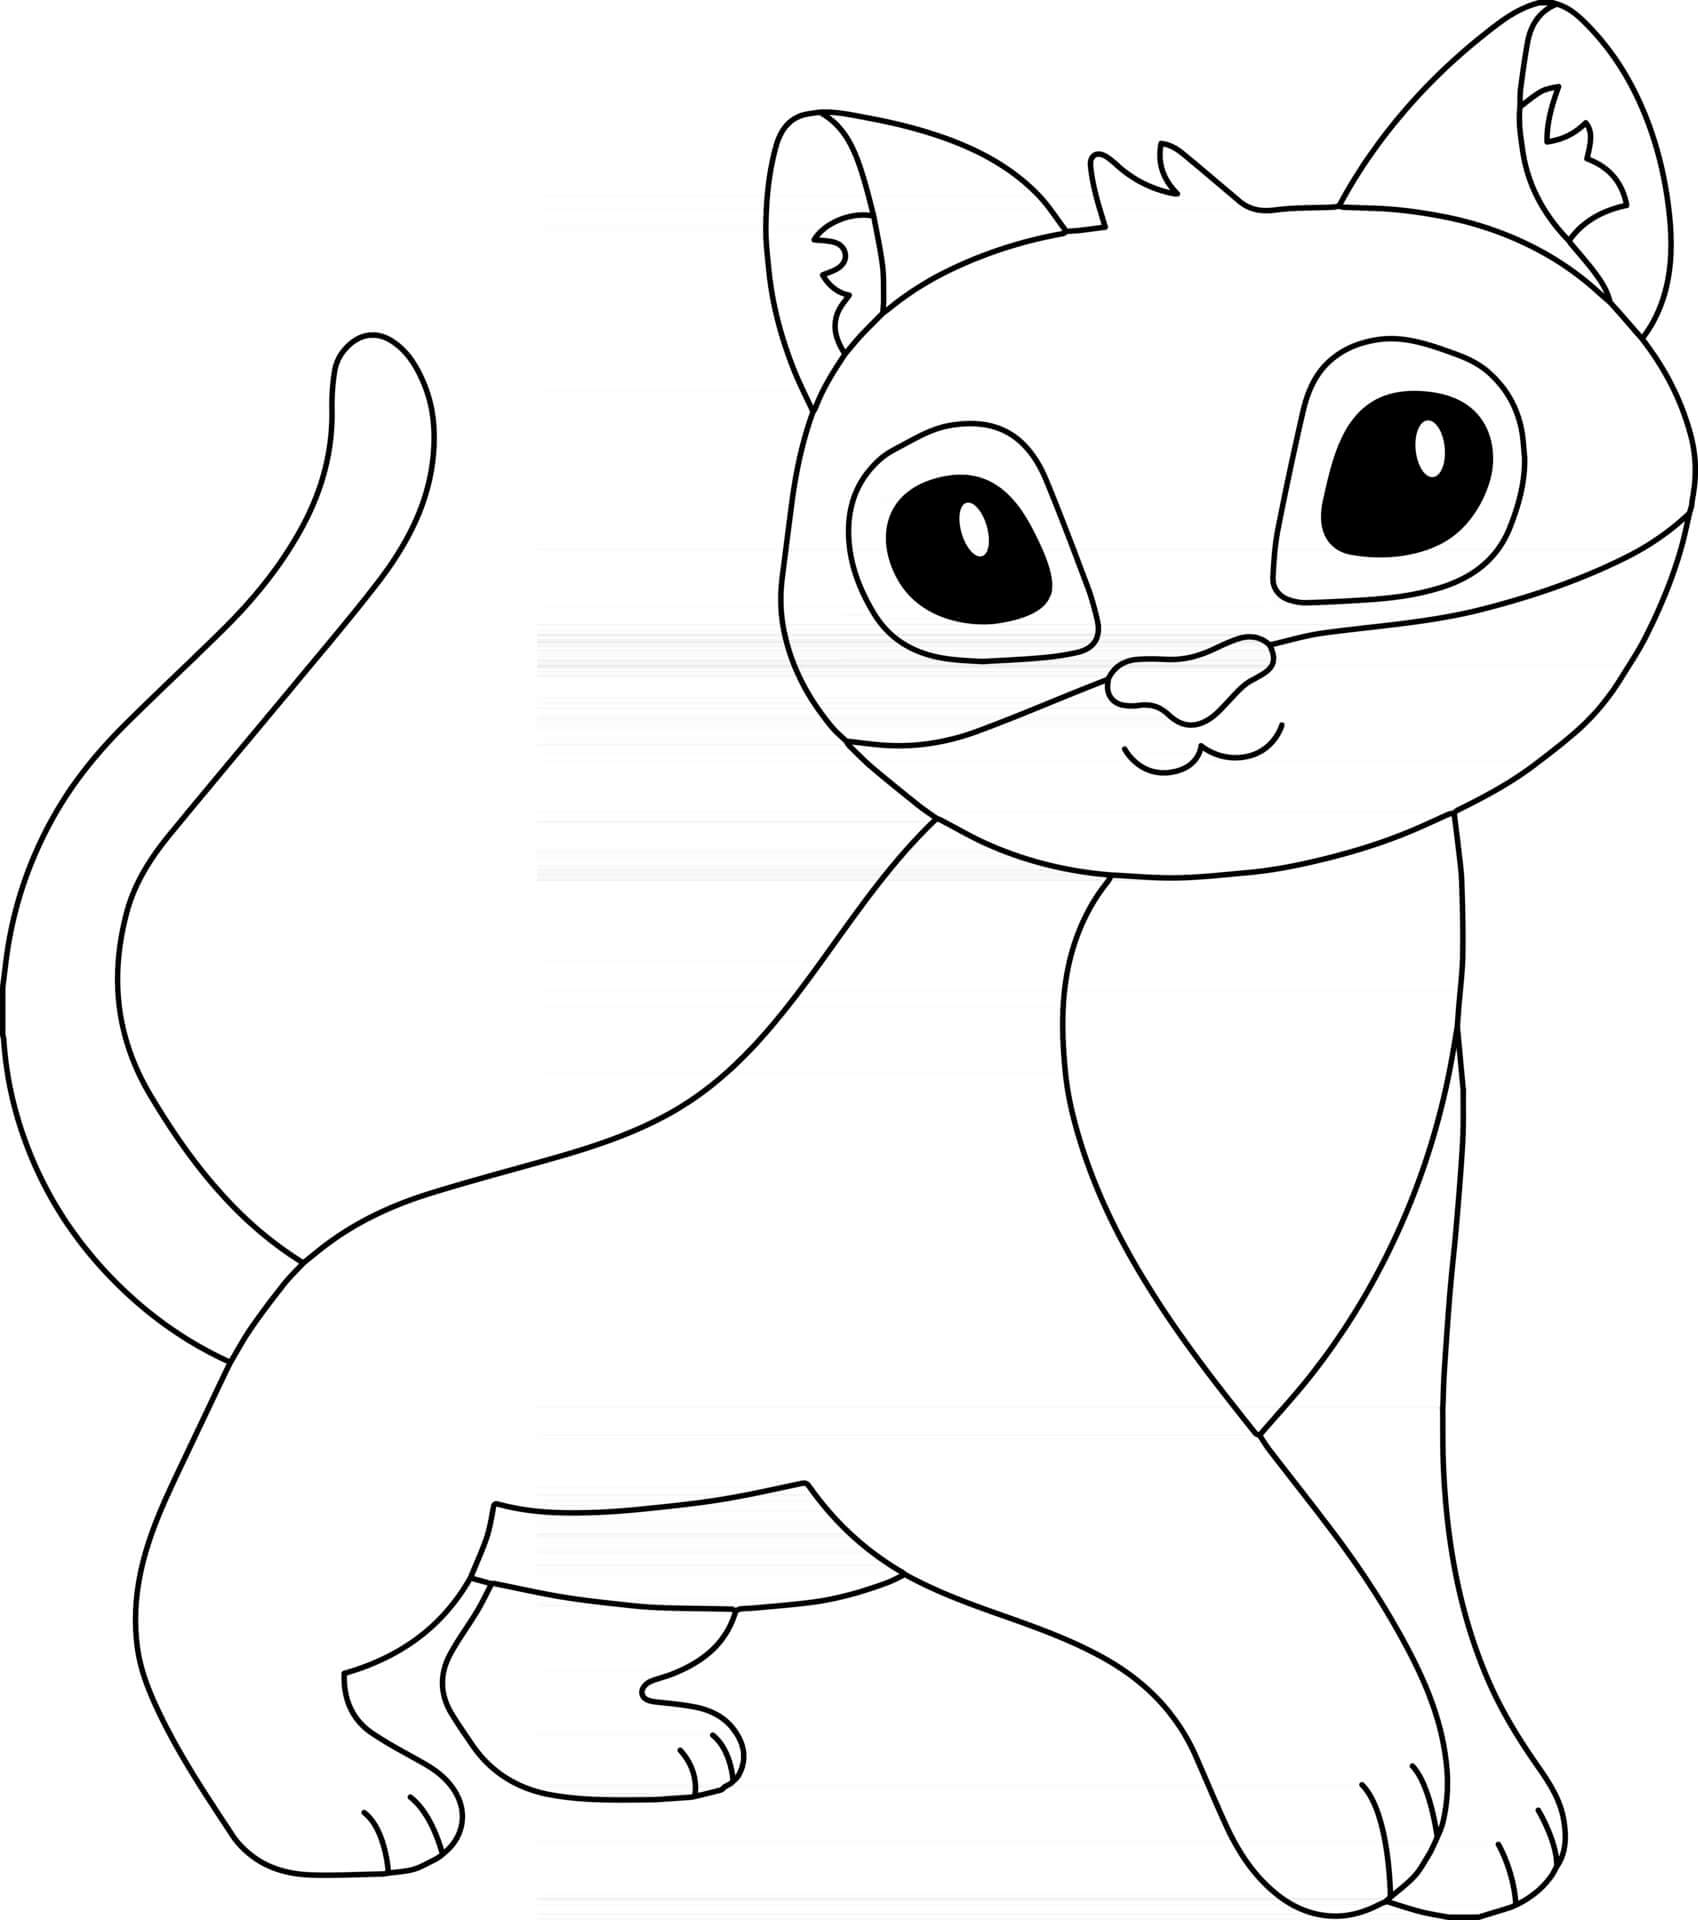 Cougar Coloring Page